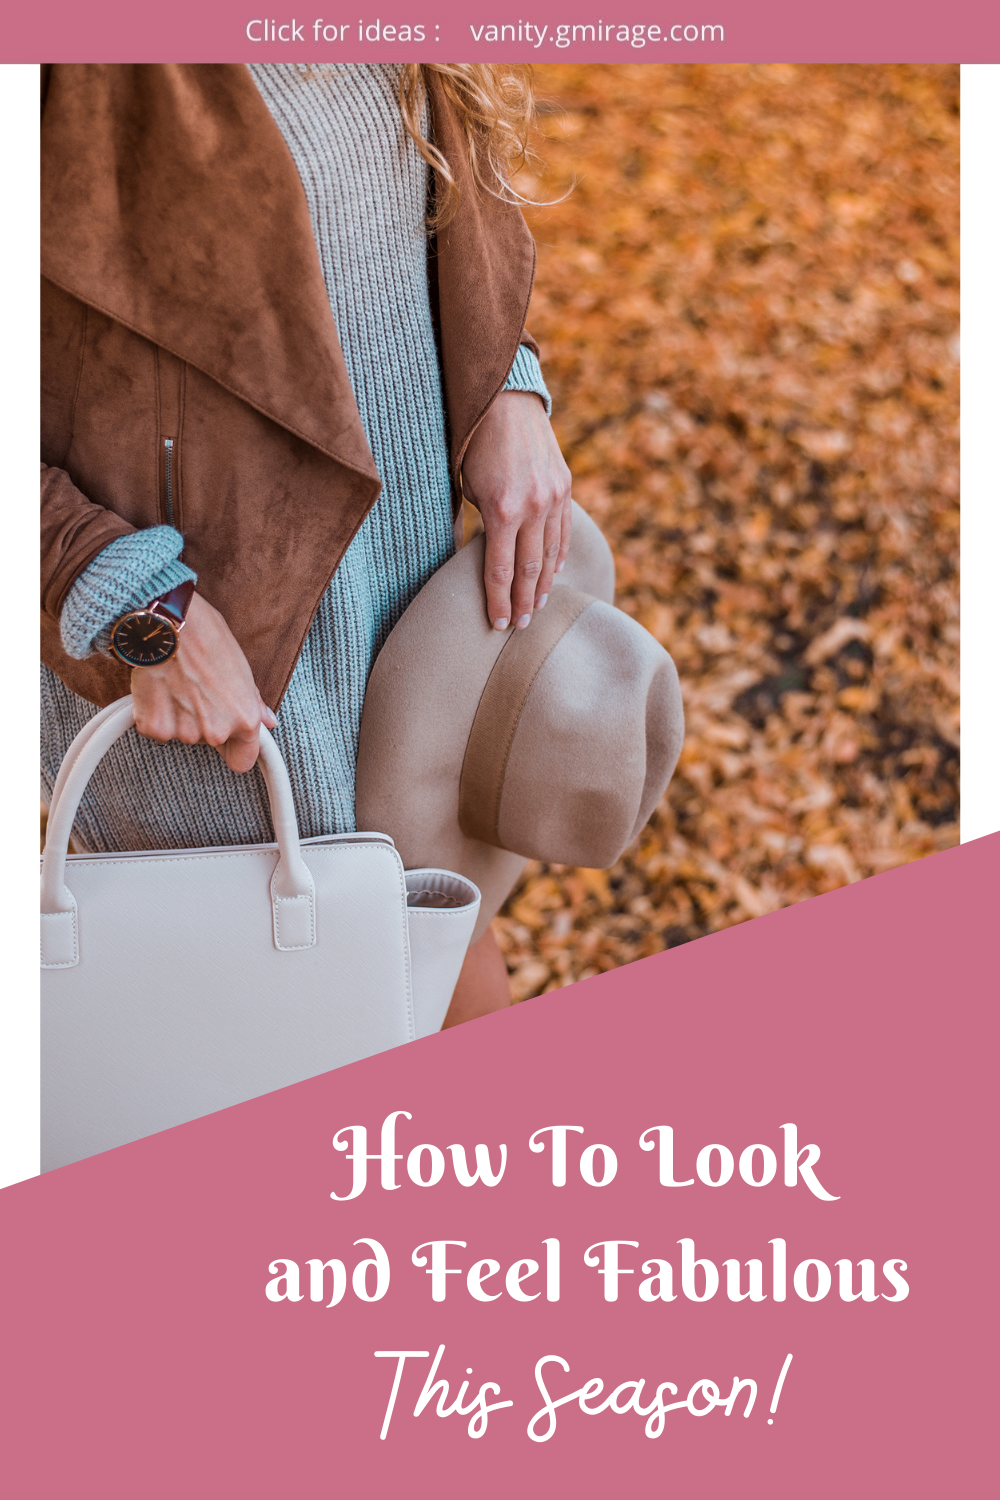 How To Look and Feel Fabulous This Season!